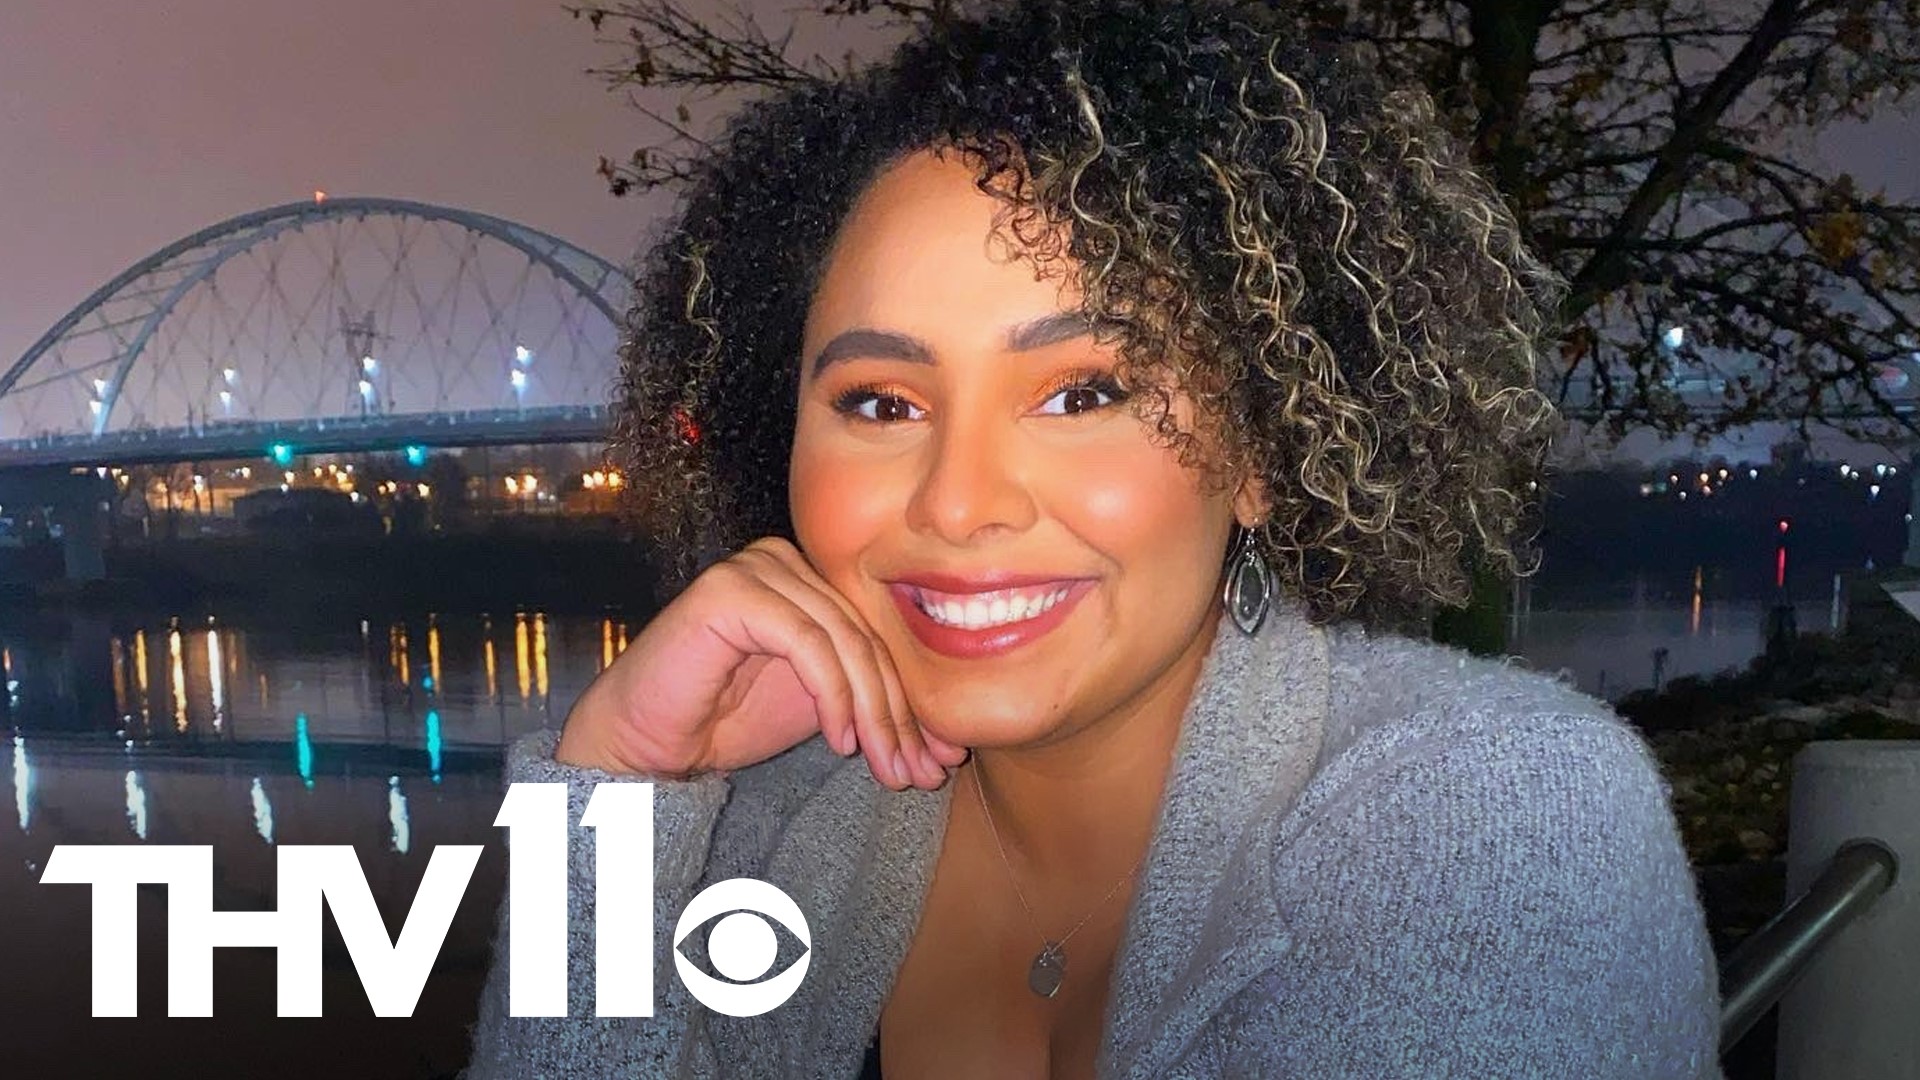 Get to know, the newest addition to Wake Up Central, Mackailyn Johnson. She will be reporting on weekday mornings and anchoring the Saturday morning show.